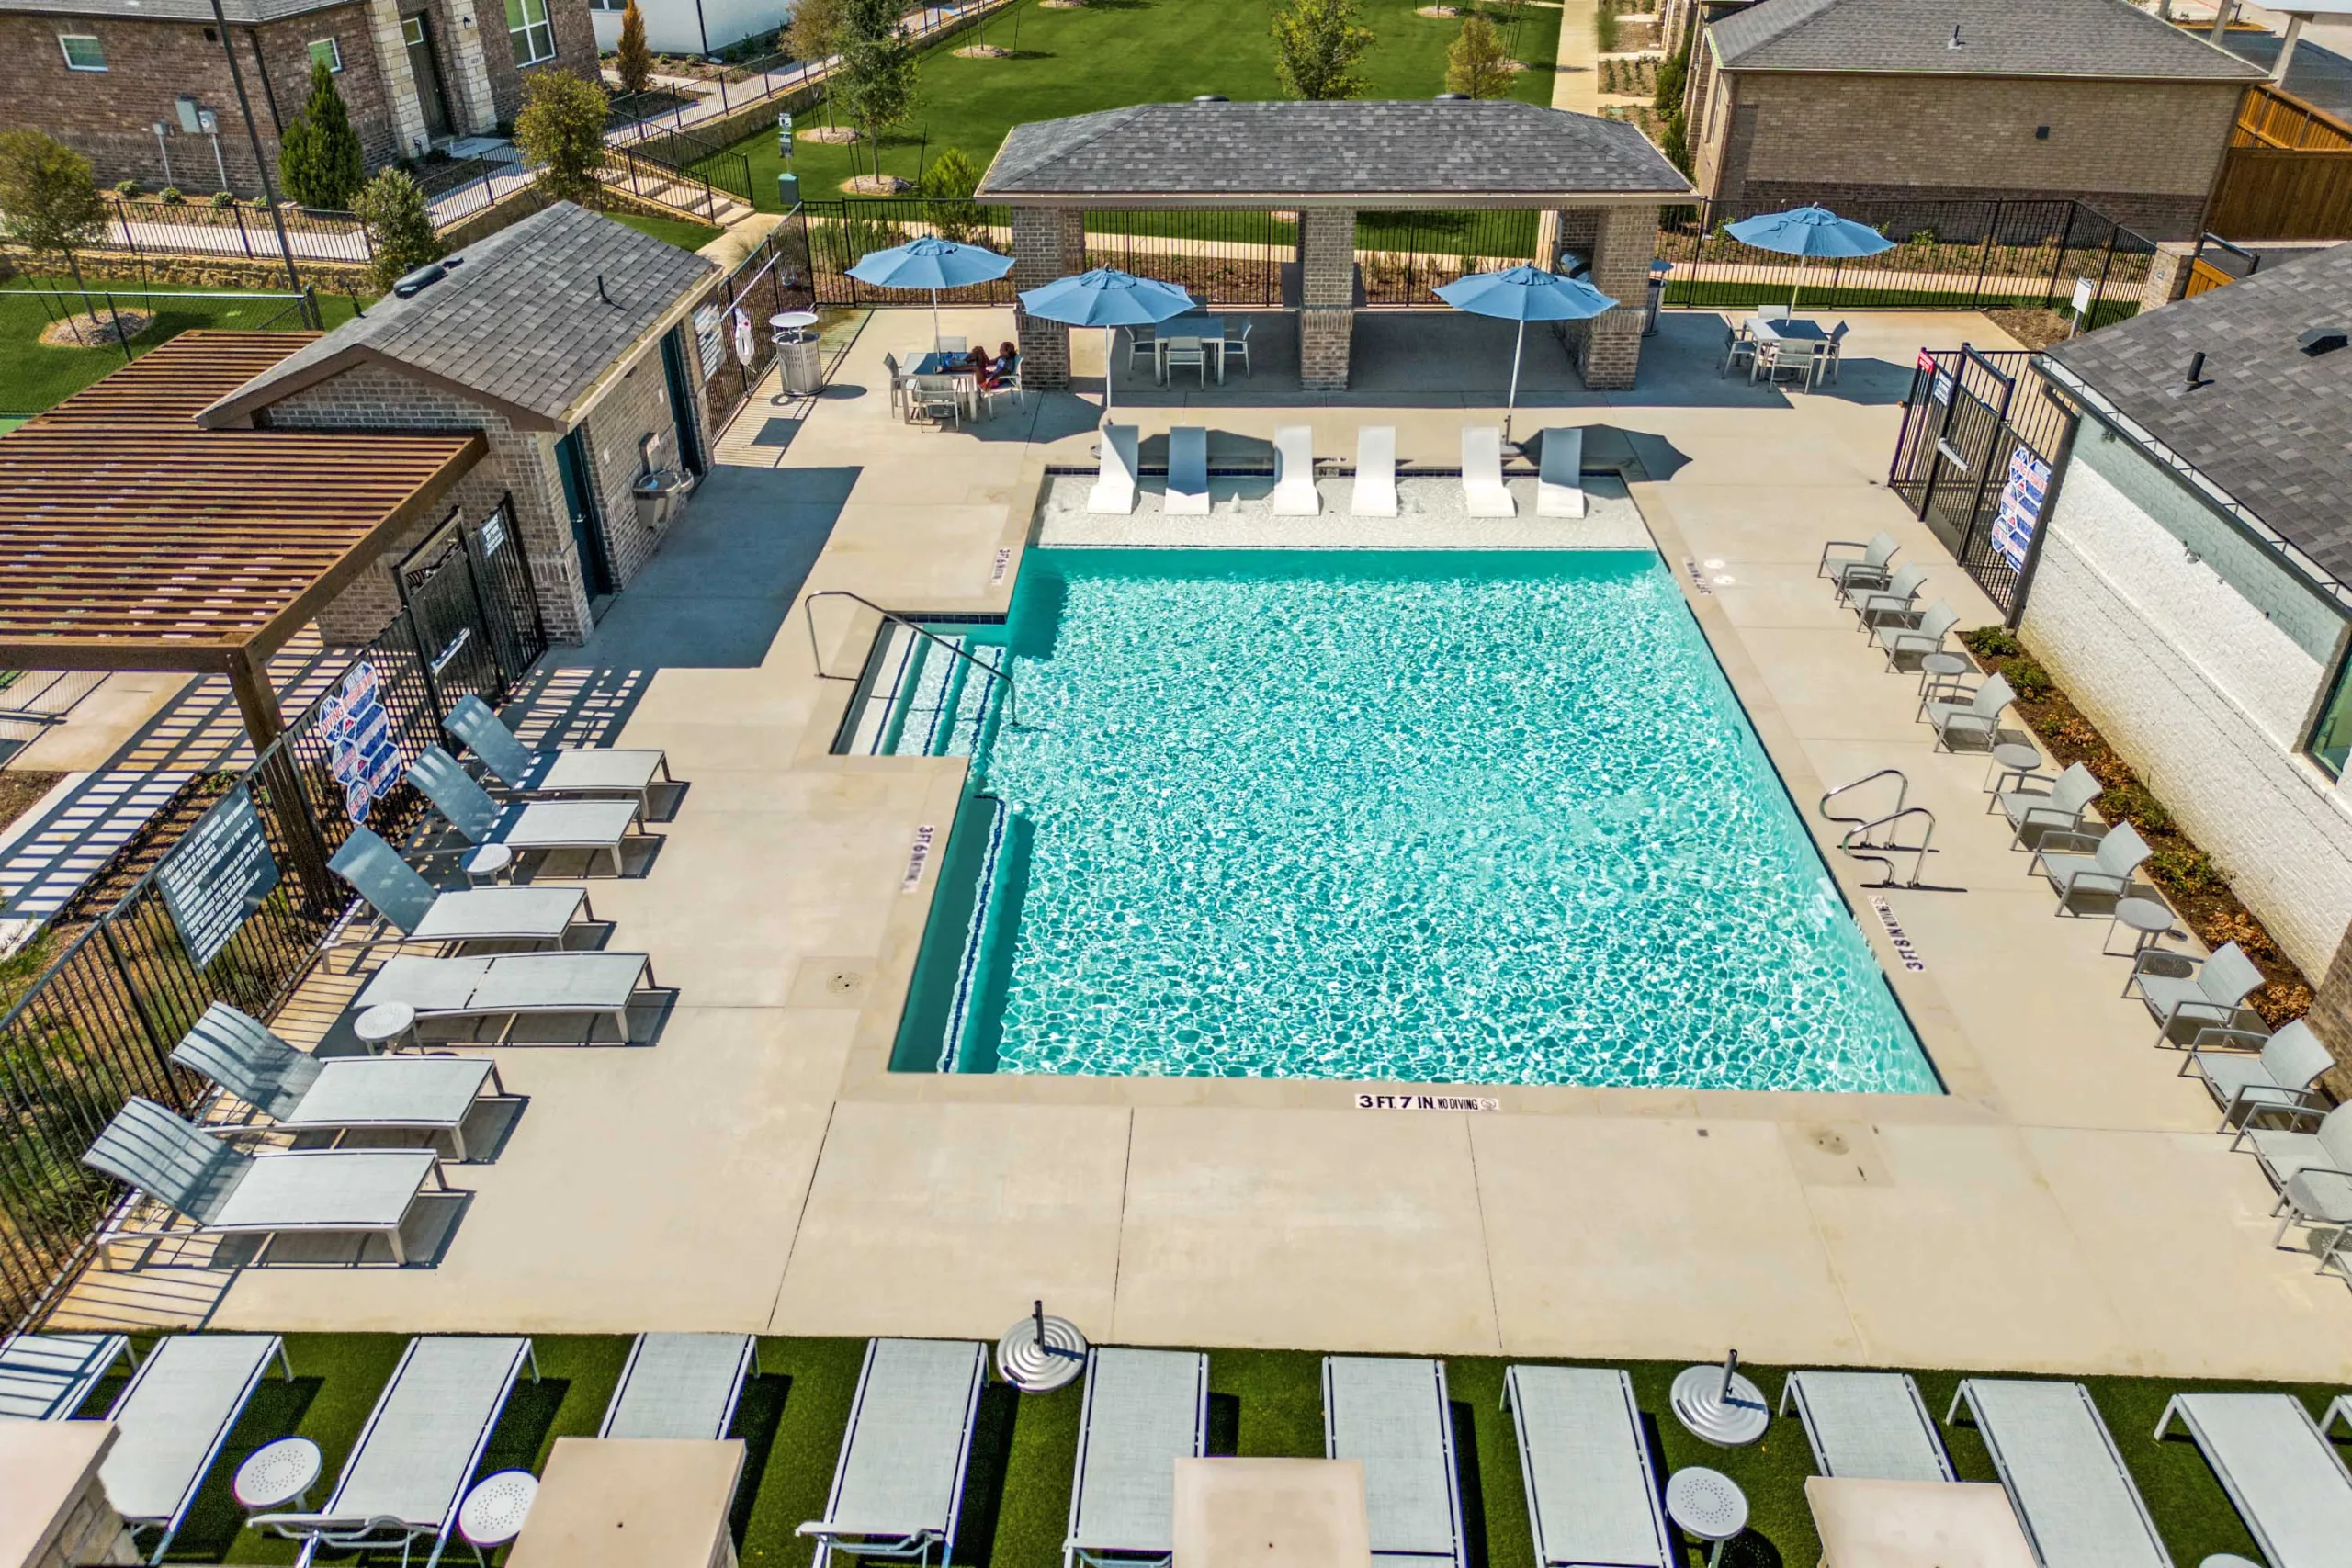 Aerial view of the pool in daylight.